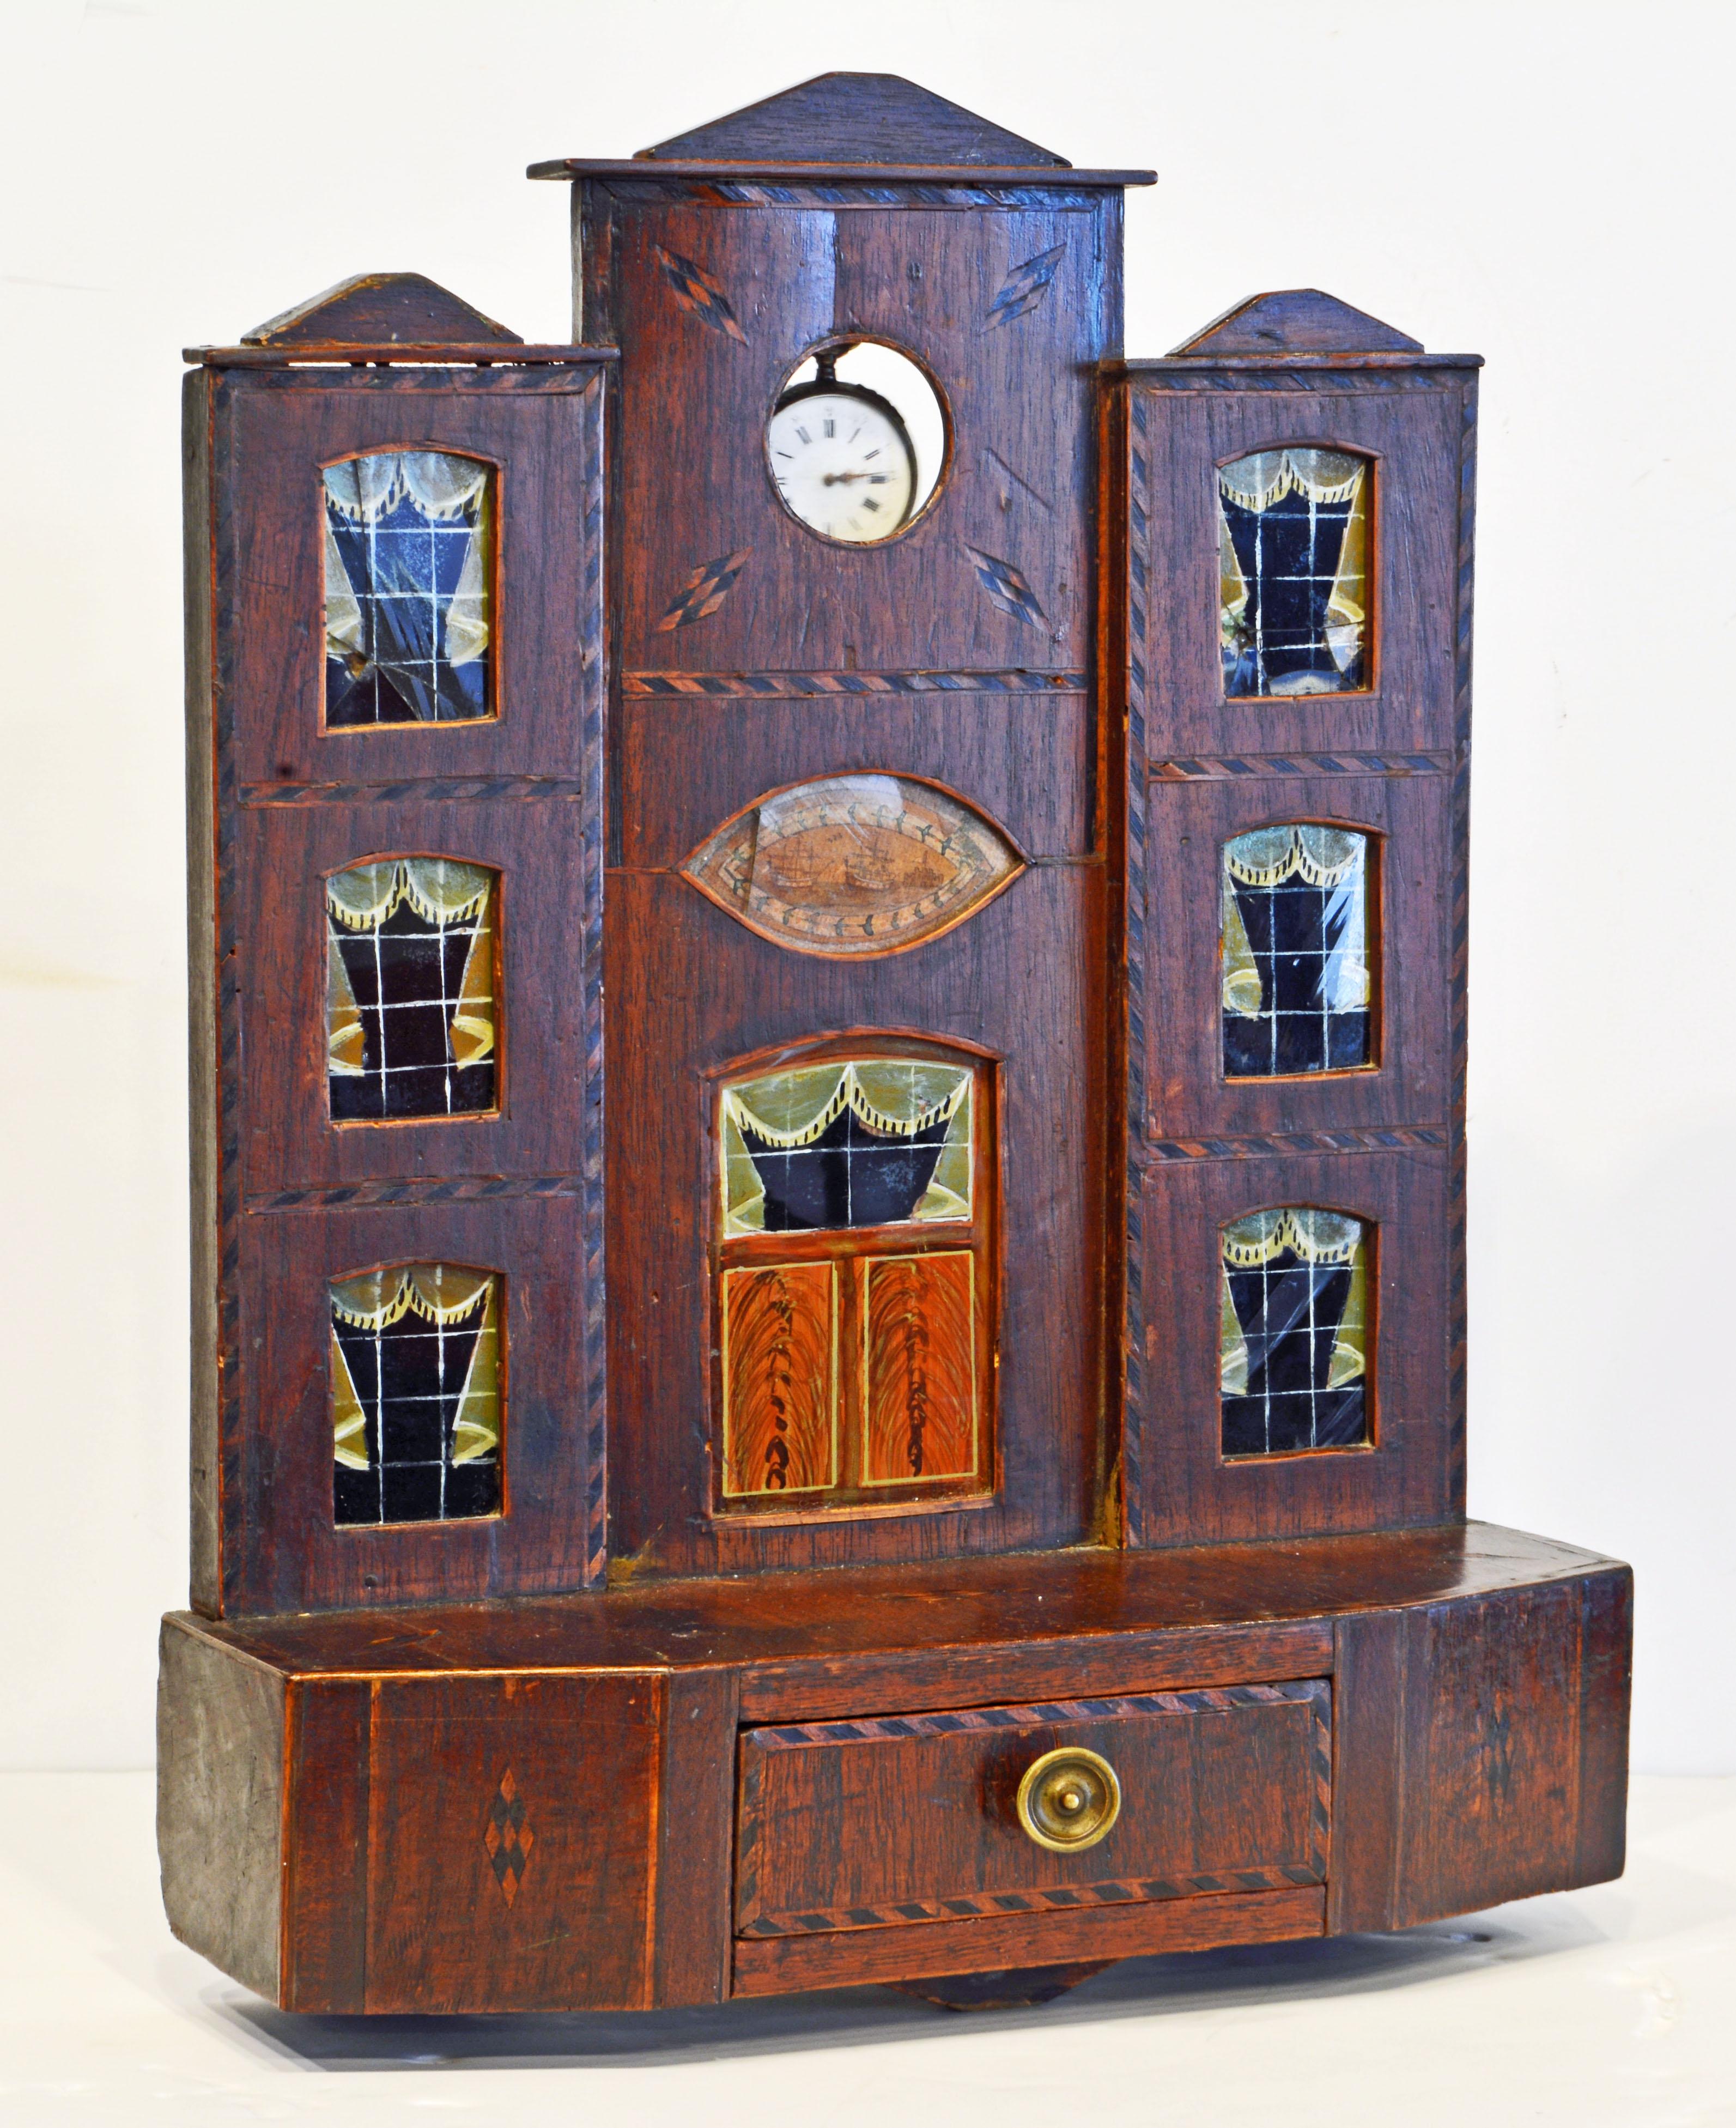 This early American inlaid pocket watch hutch or stand is made in the form of a three story house on a base with one drawer. The door and windows are made of glass painted on the backside. The piece is beautifully inlaid in a nautical theme and